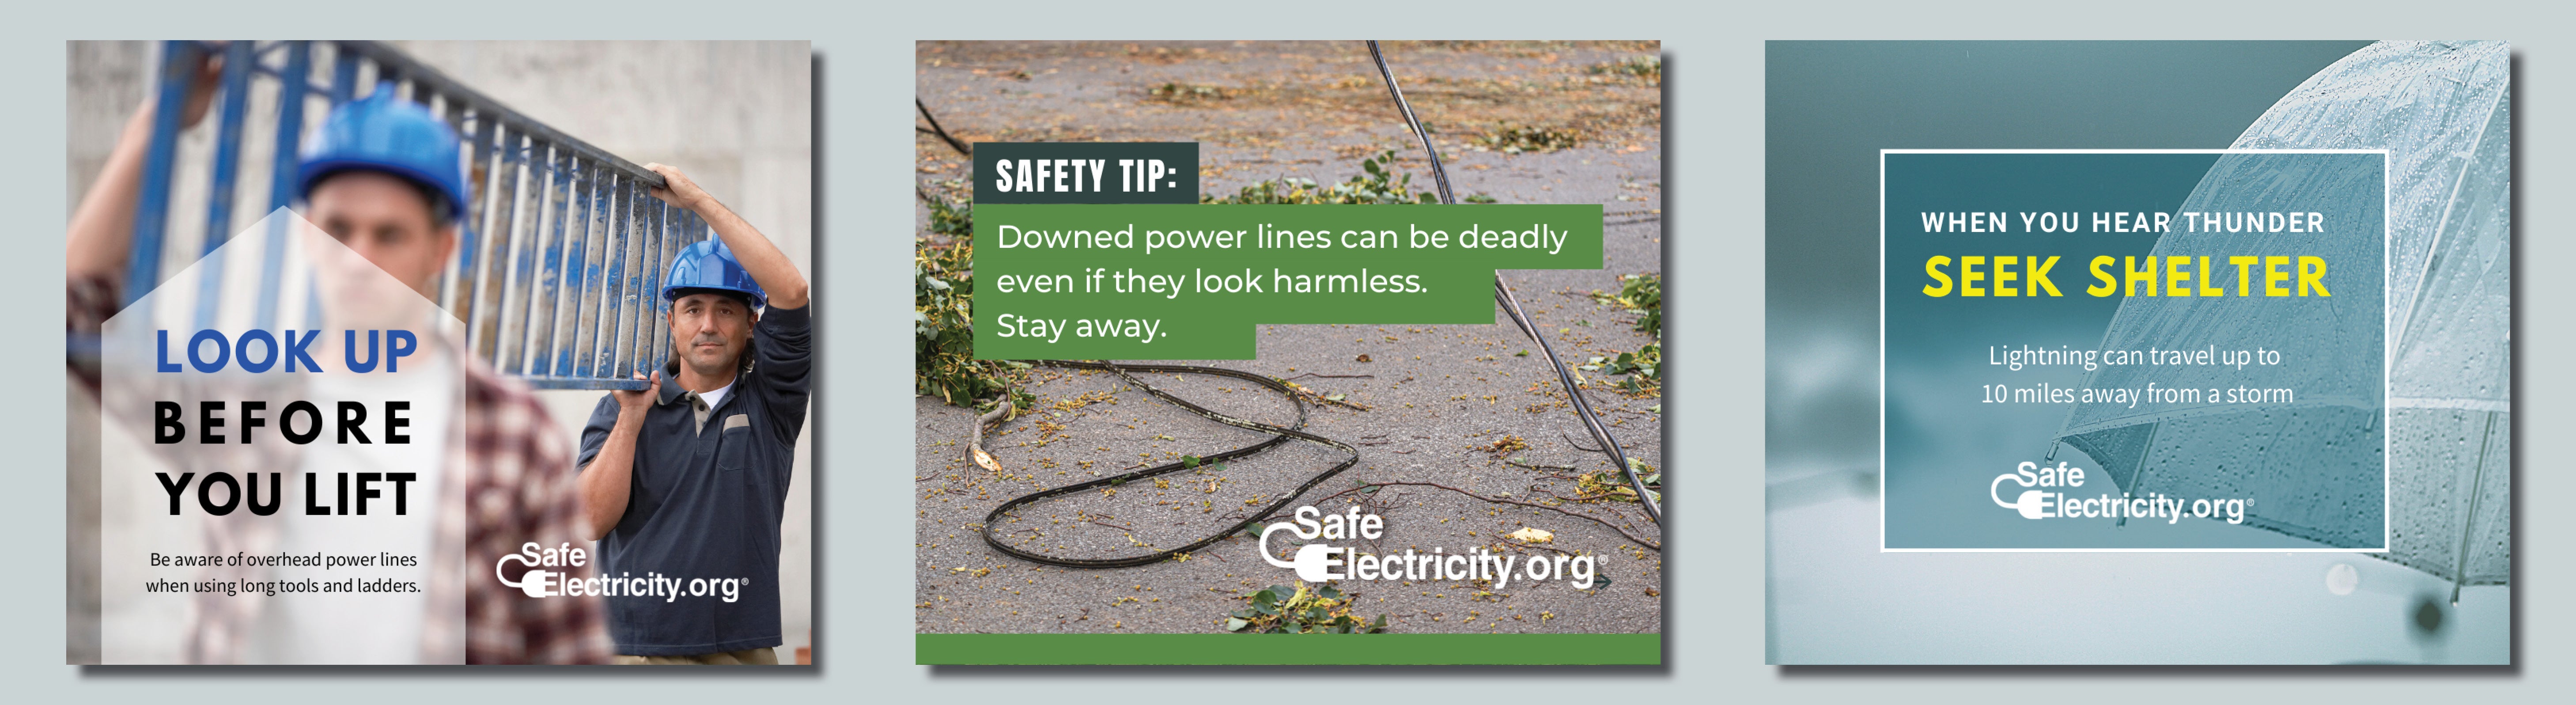 Look up before you lift; stay away from downed lines; when you hear thunder, seek shelter